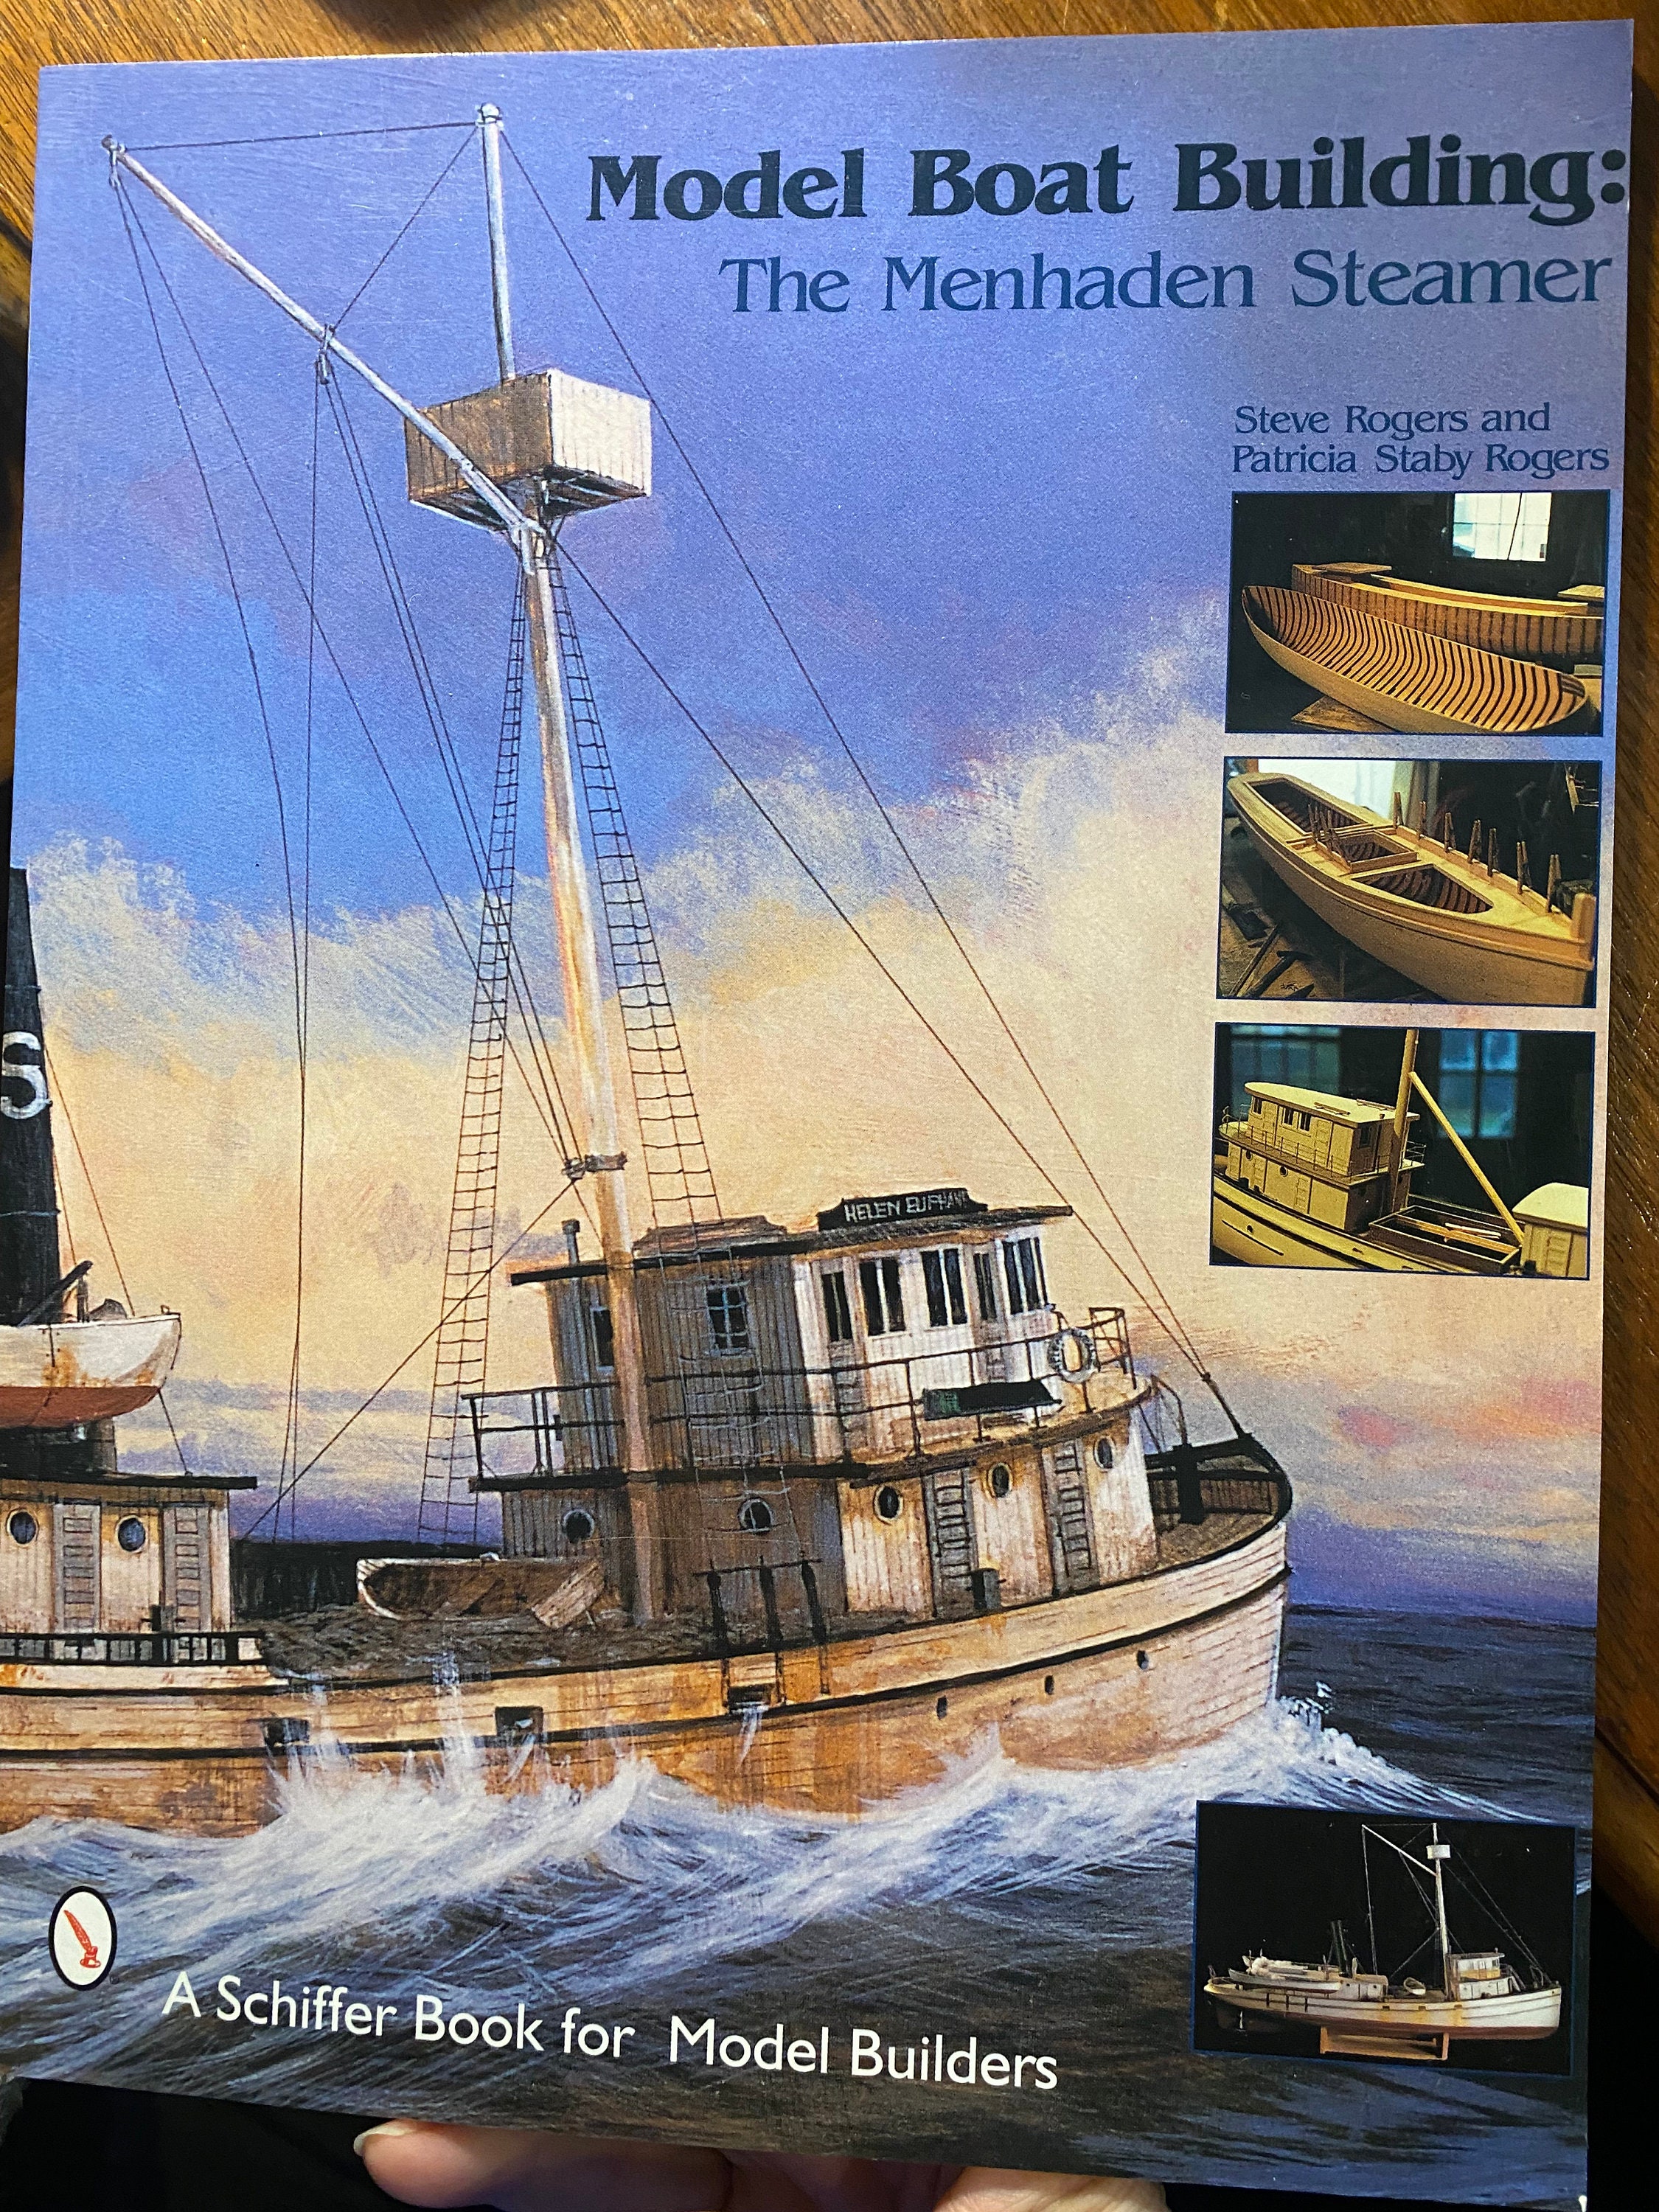 The Men All Singing: The Story of Menhaden Fishing [Book]